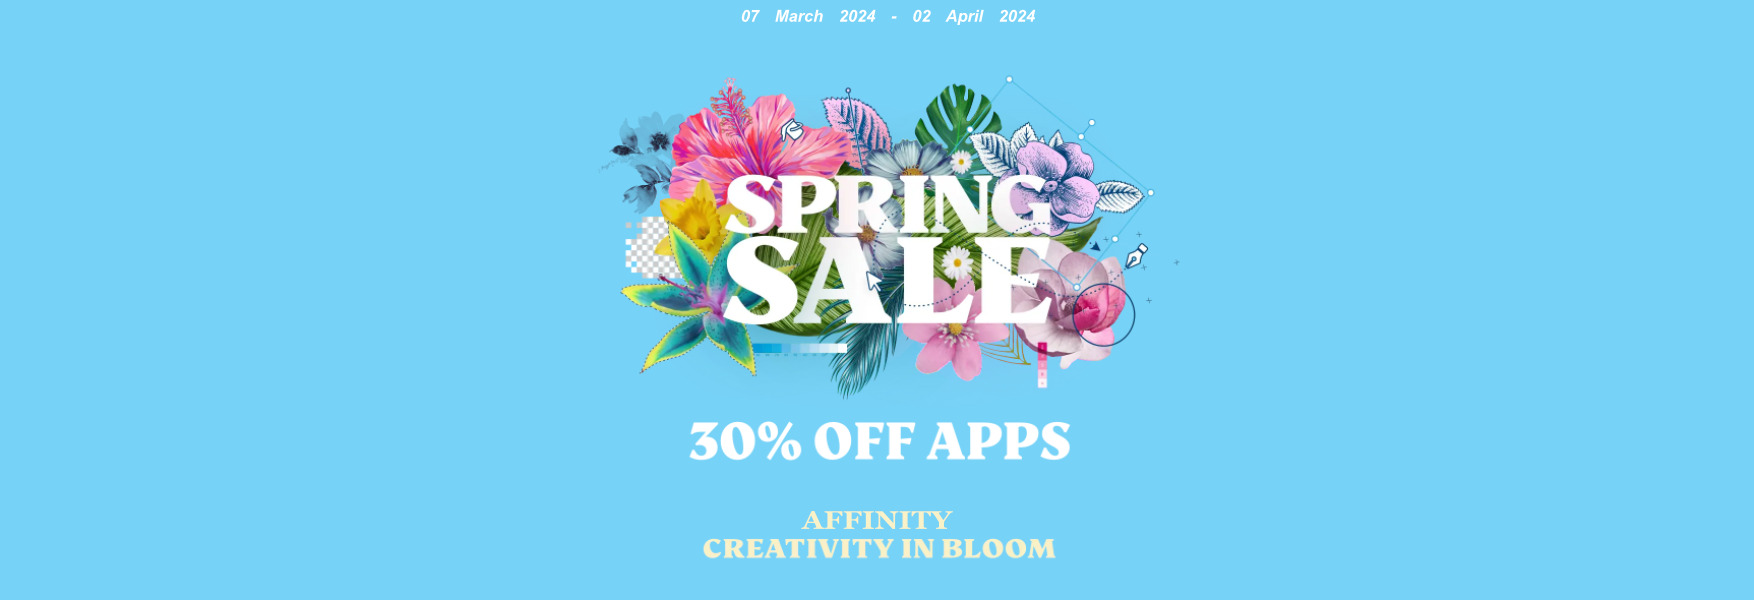 Affinity ลดพิเศษ 30% SPRING SALE blossoming inside a colourful bouquet of flowers on a pale blue bac